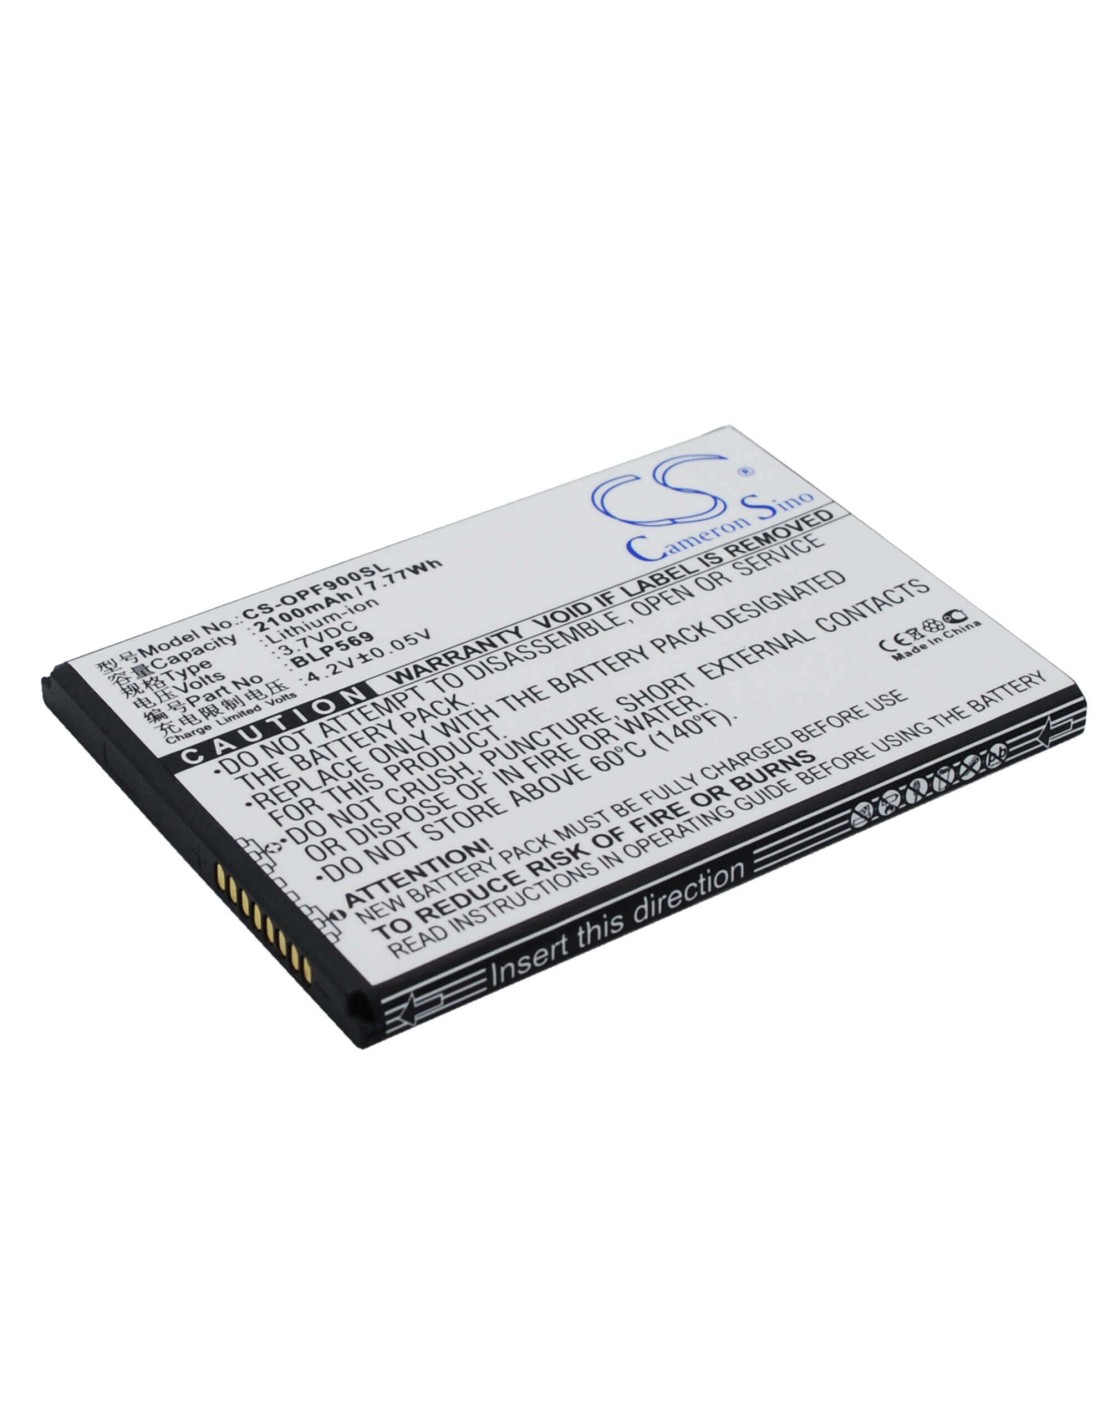 Battery for OPPO Find 7, X9007, Find 7a 3.7V, 2100mAh - 7.77Wh